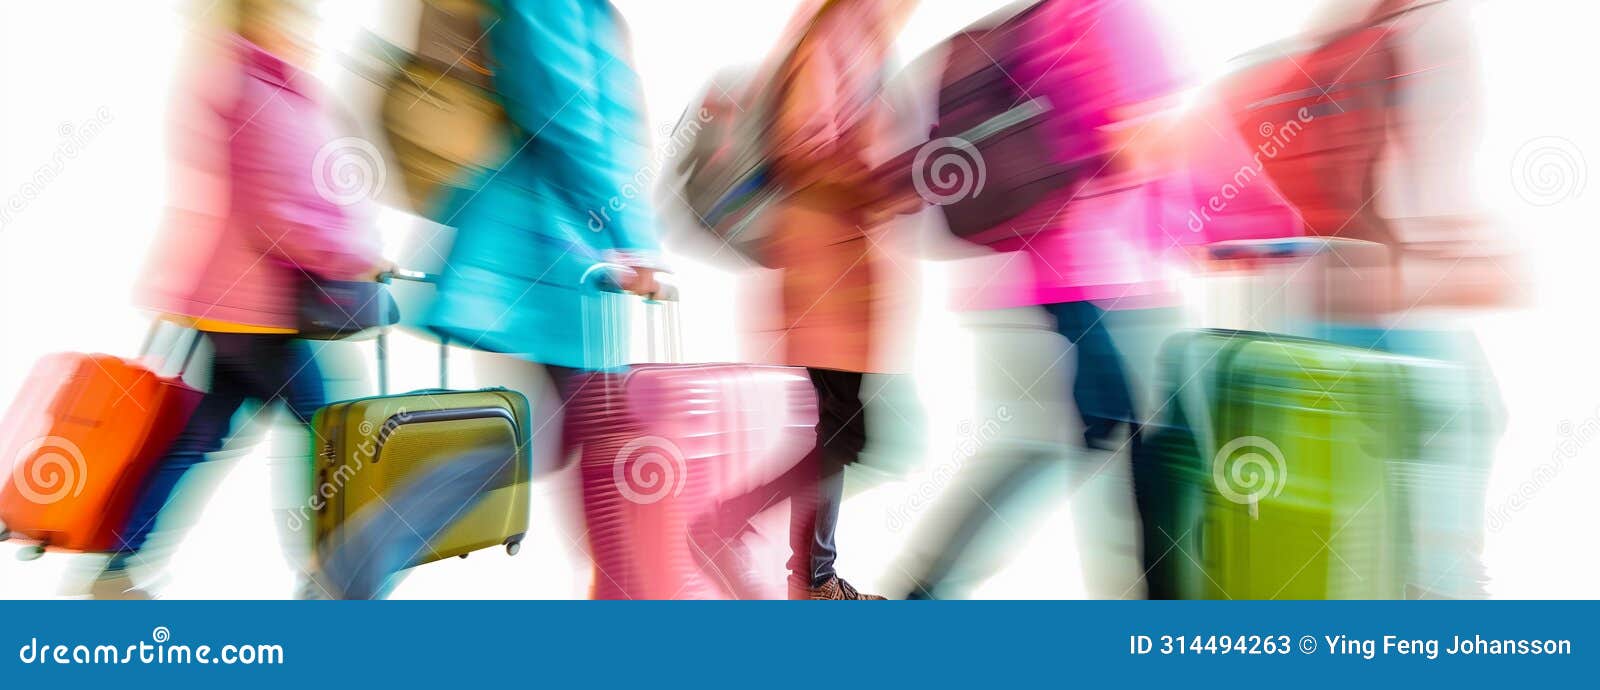 blurred figures capture the constant movement and energy of travelers.